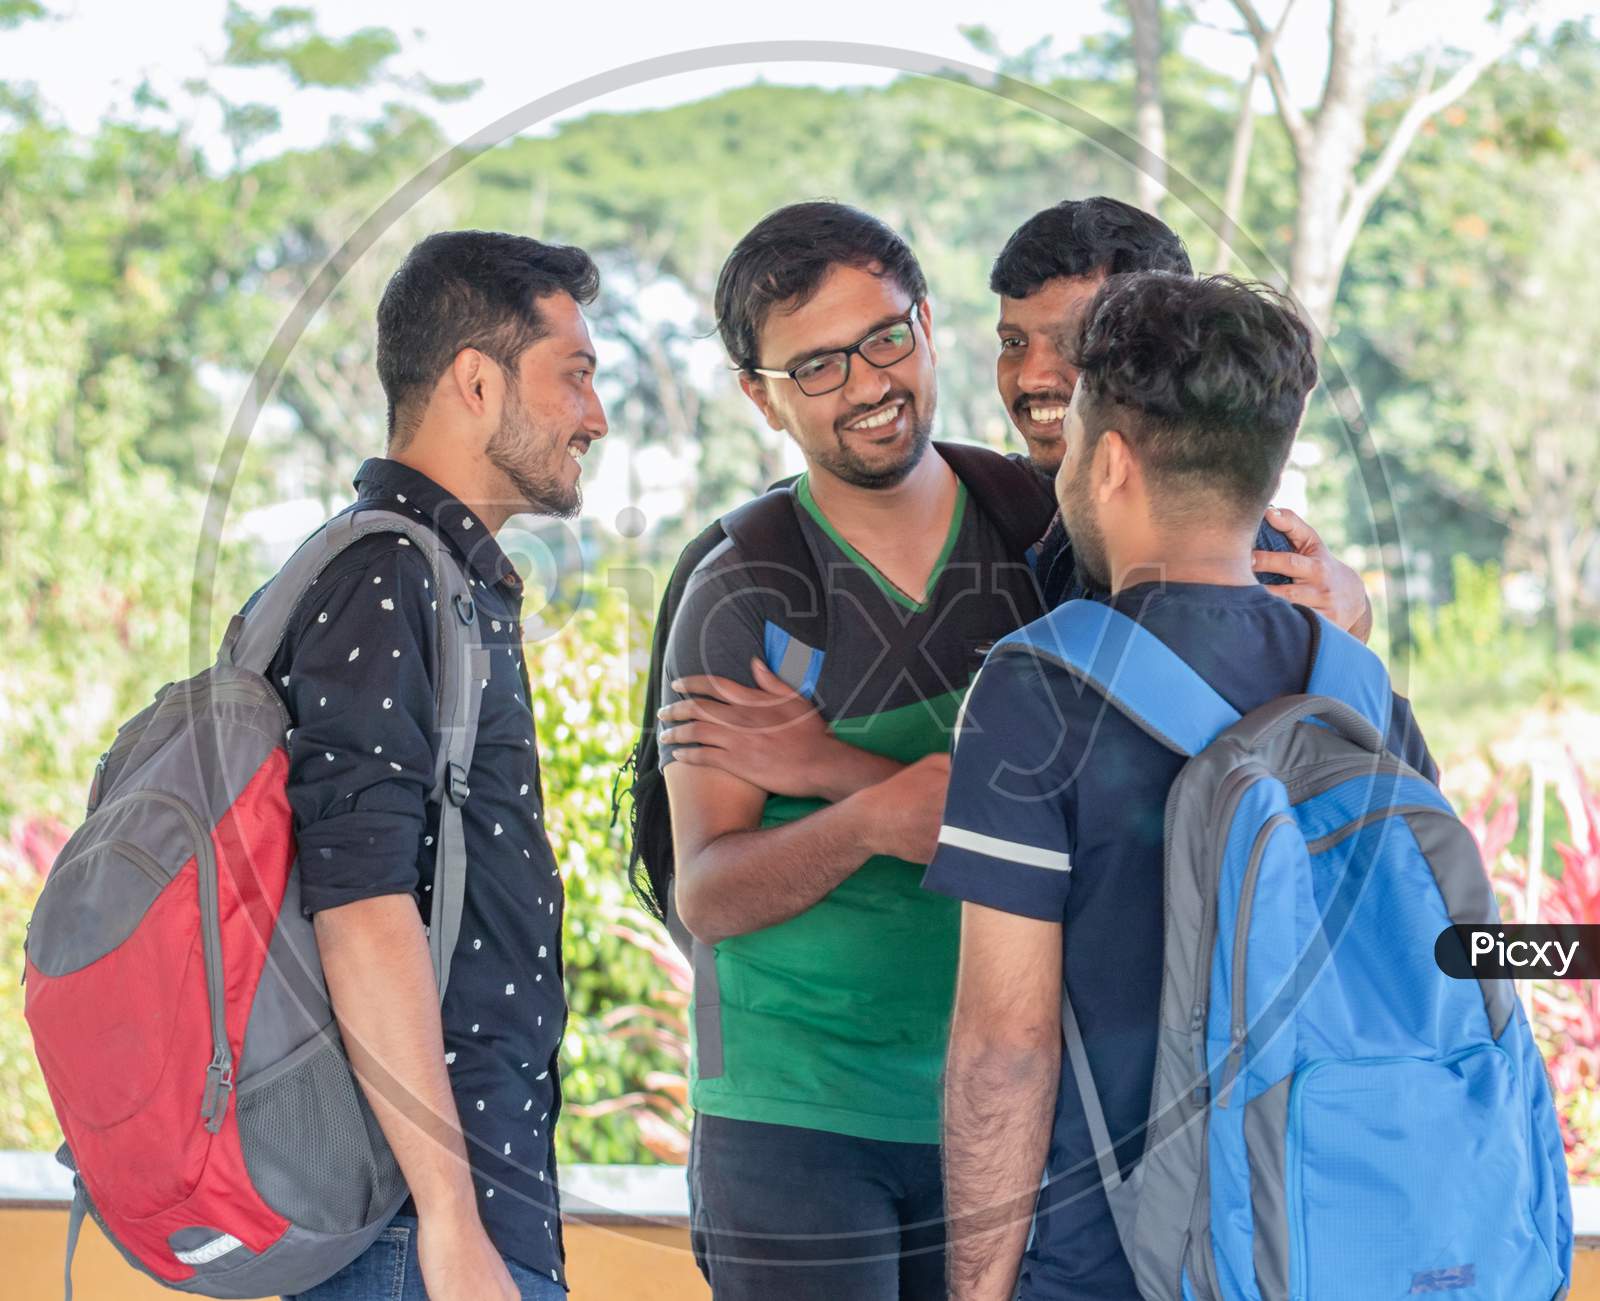 A Group of students Talking to each other at A University or College Campus